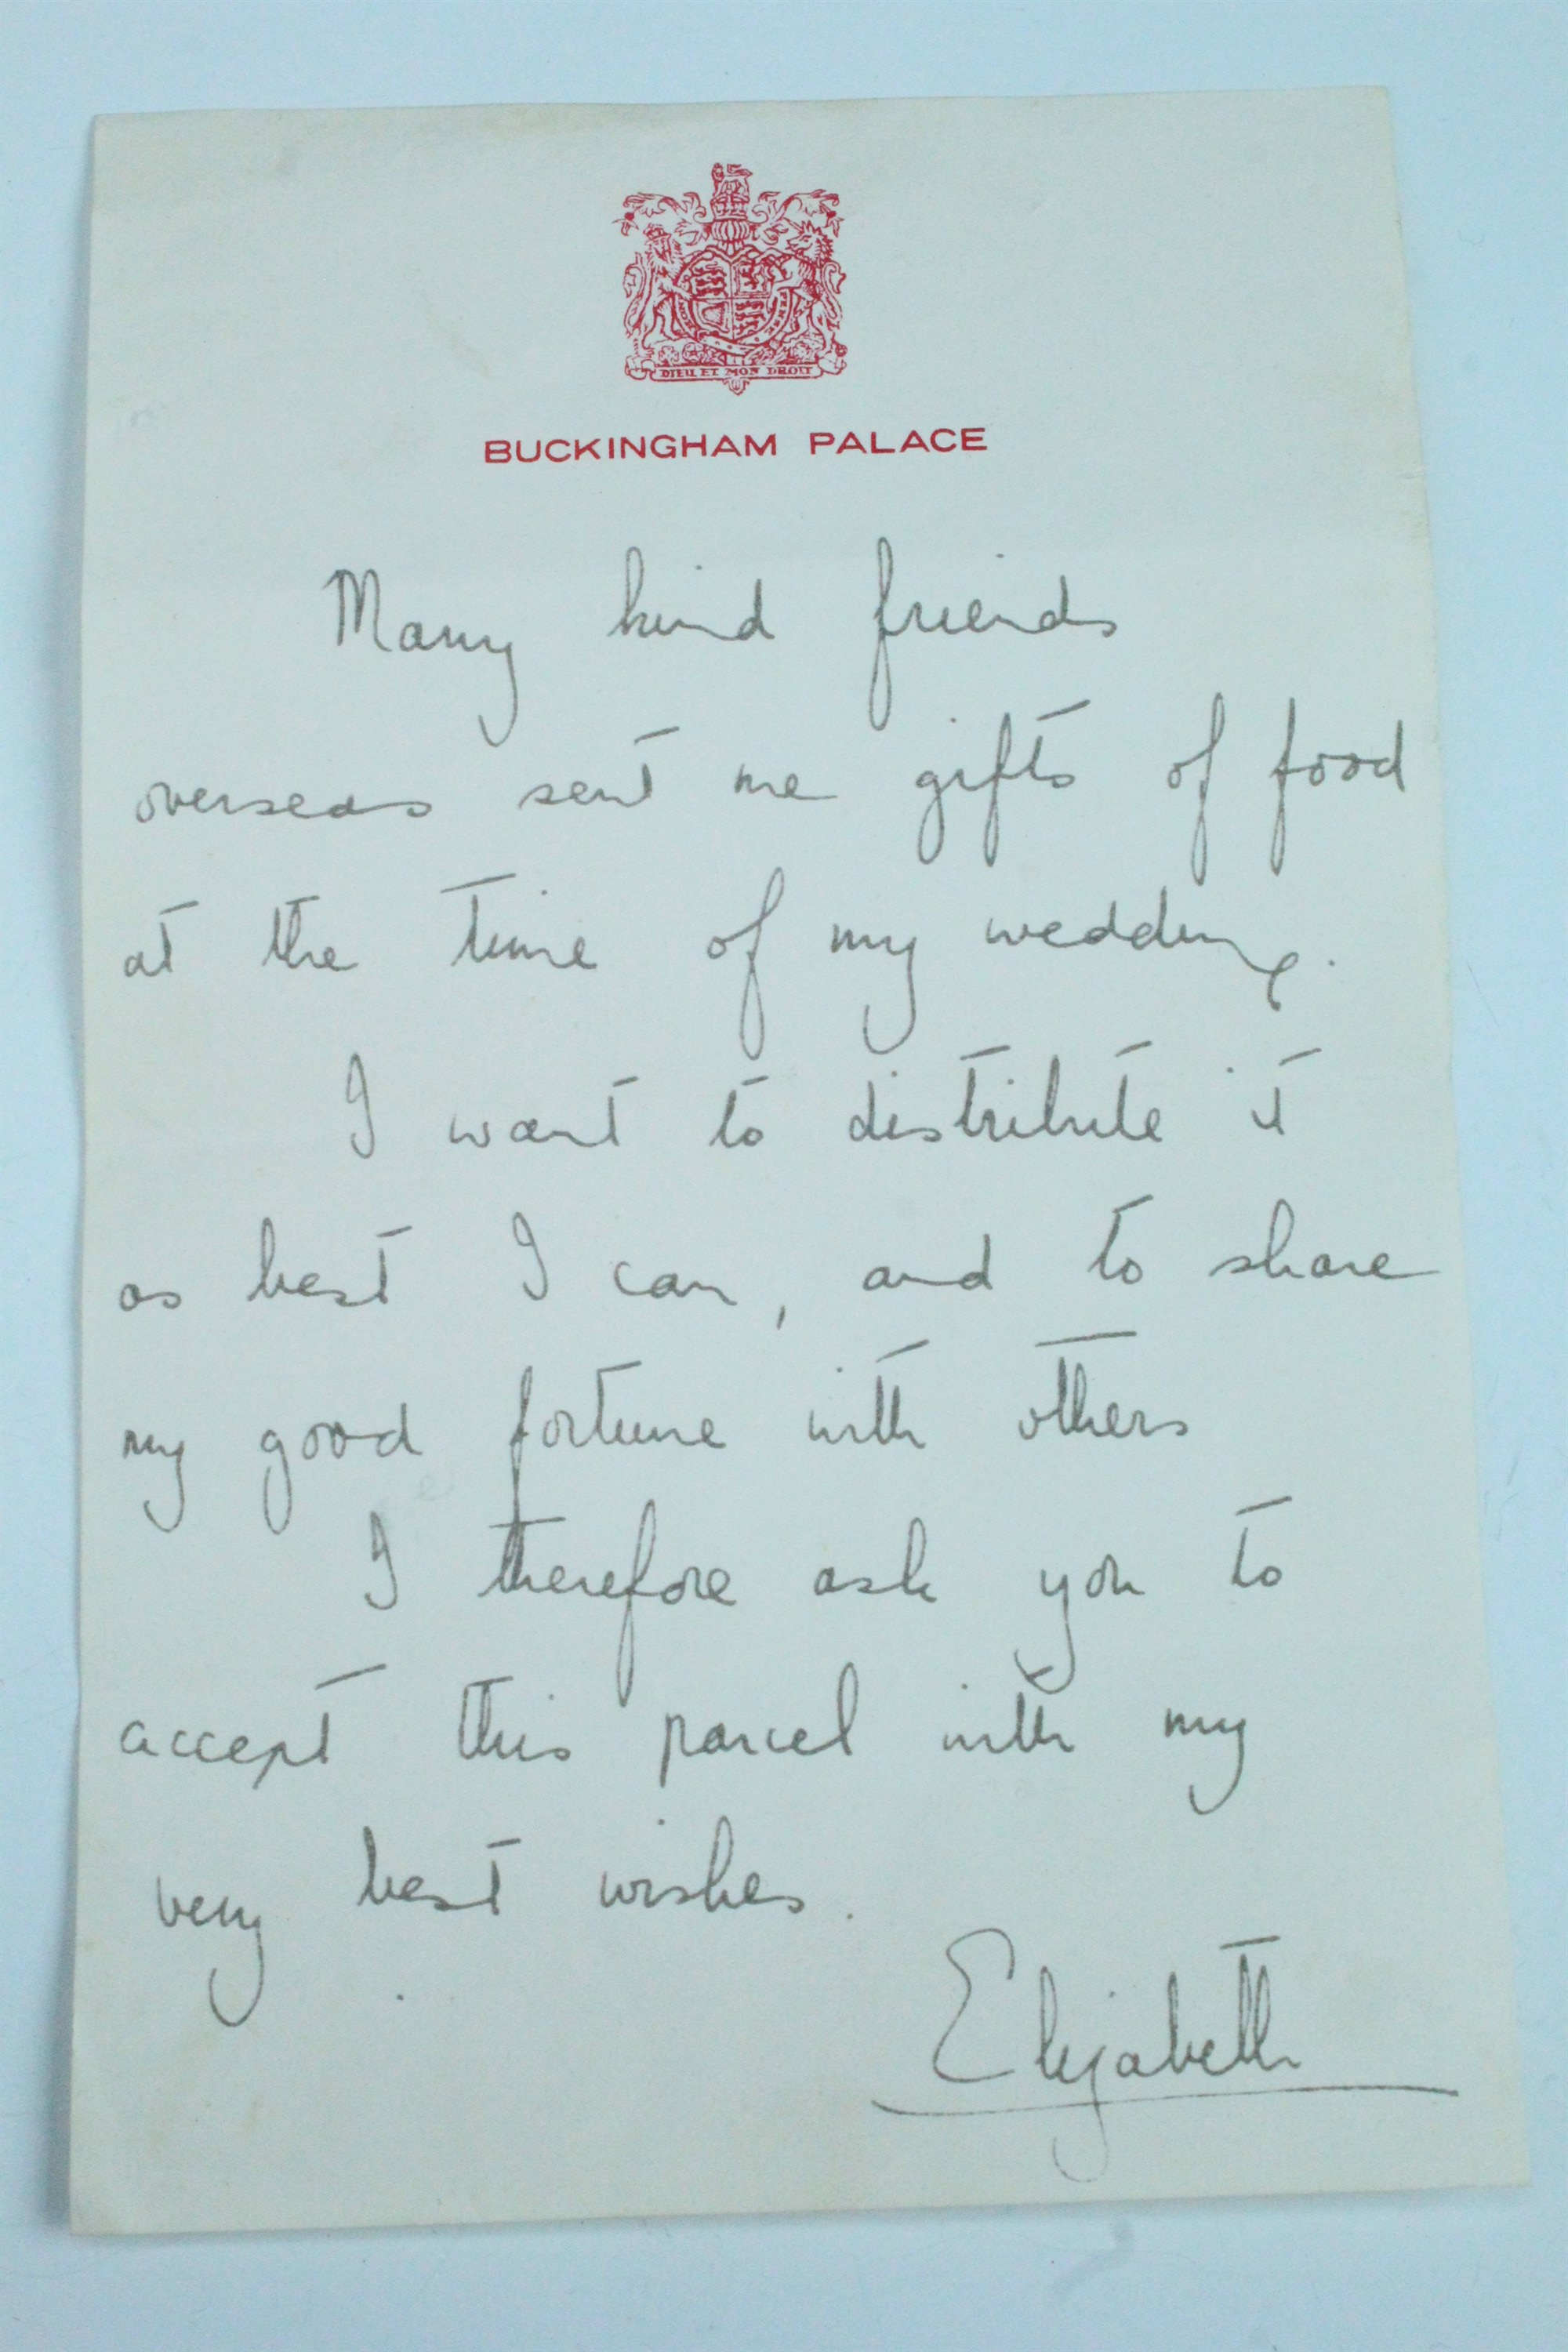 A printed letter from Queen Elizabeth II which accompanied gifts following her wedding in 1947, it